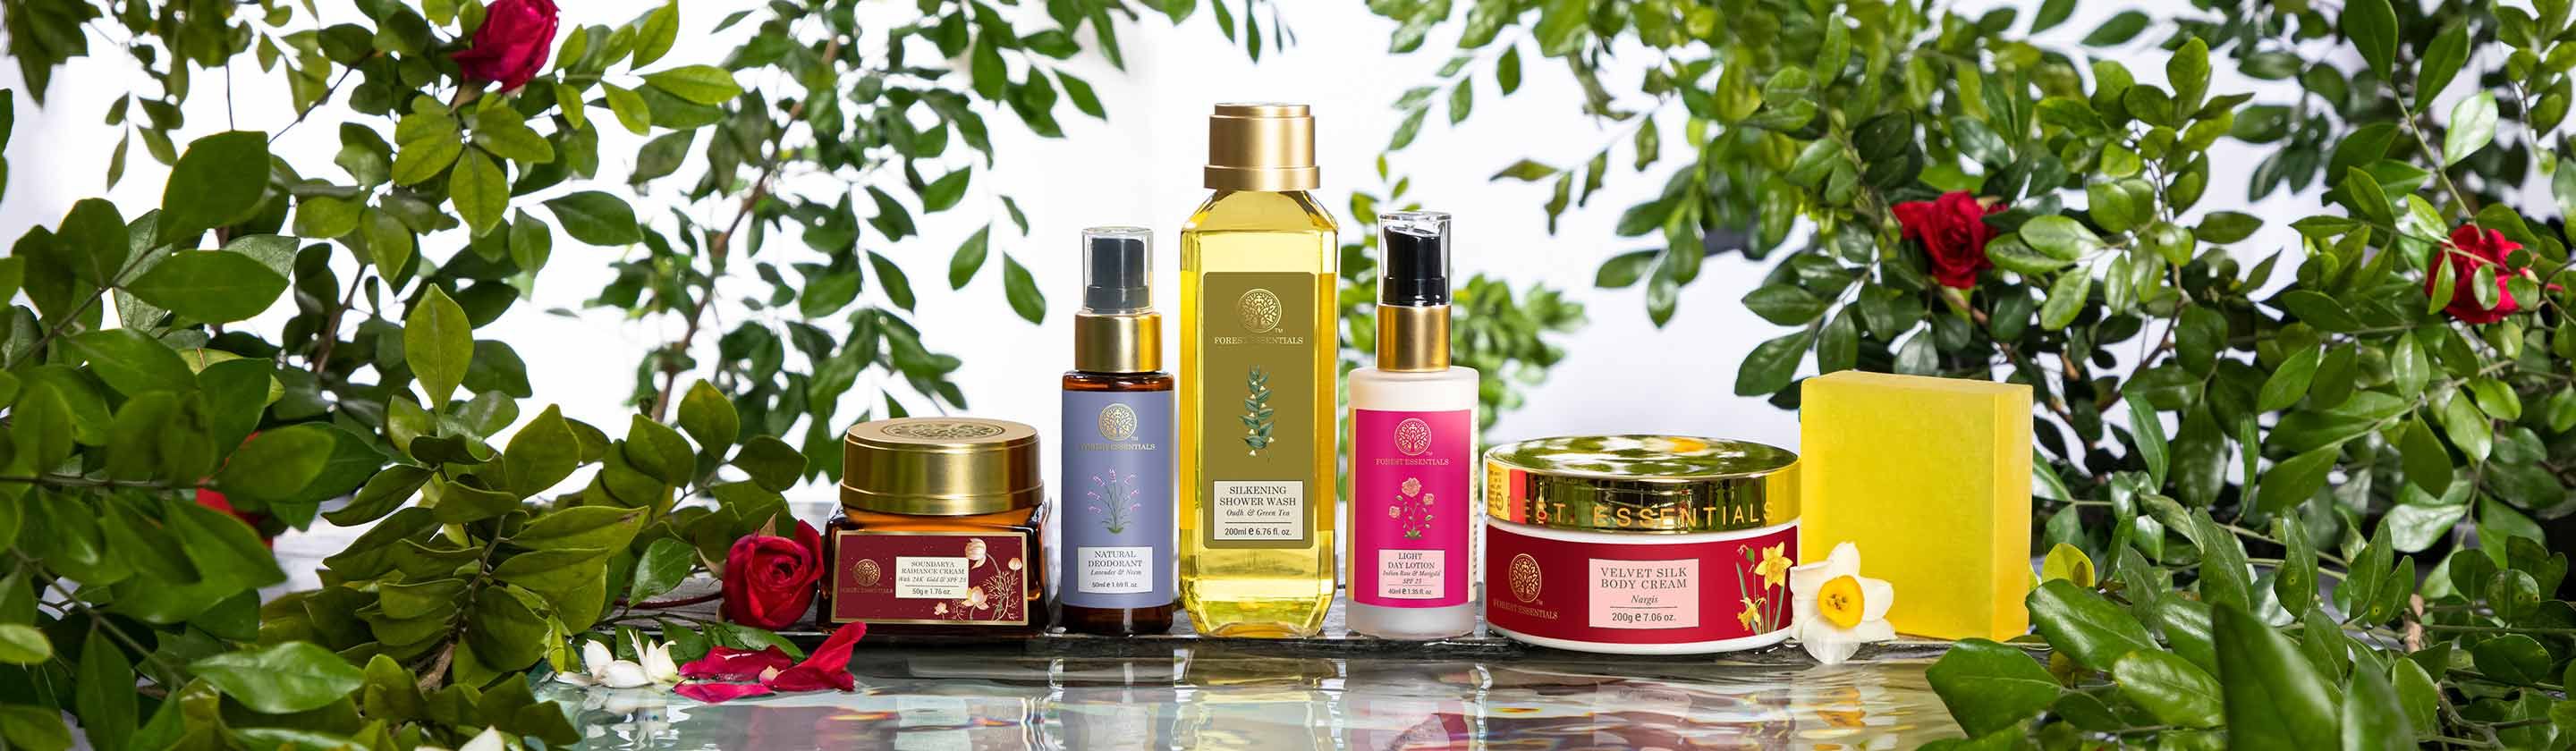 Latest Collection of Ayurvedic Beauty Products Online - Forest Essentials  India